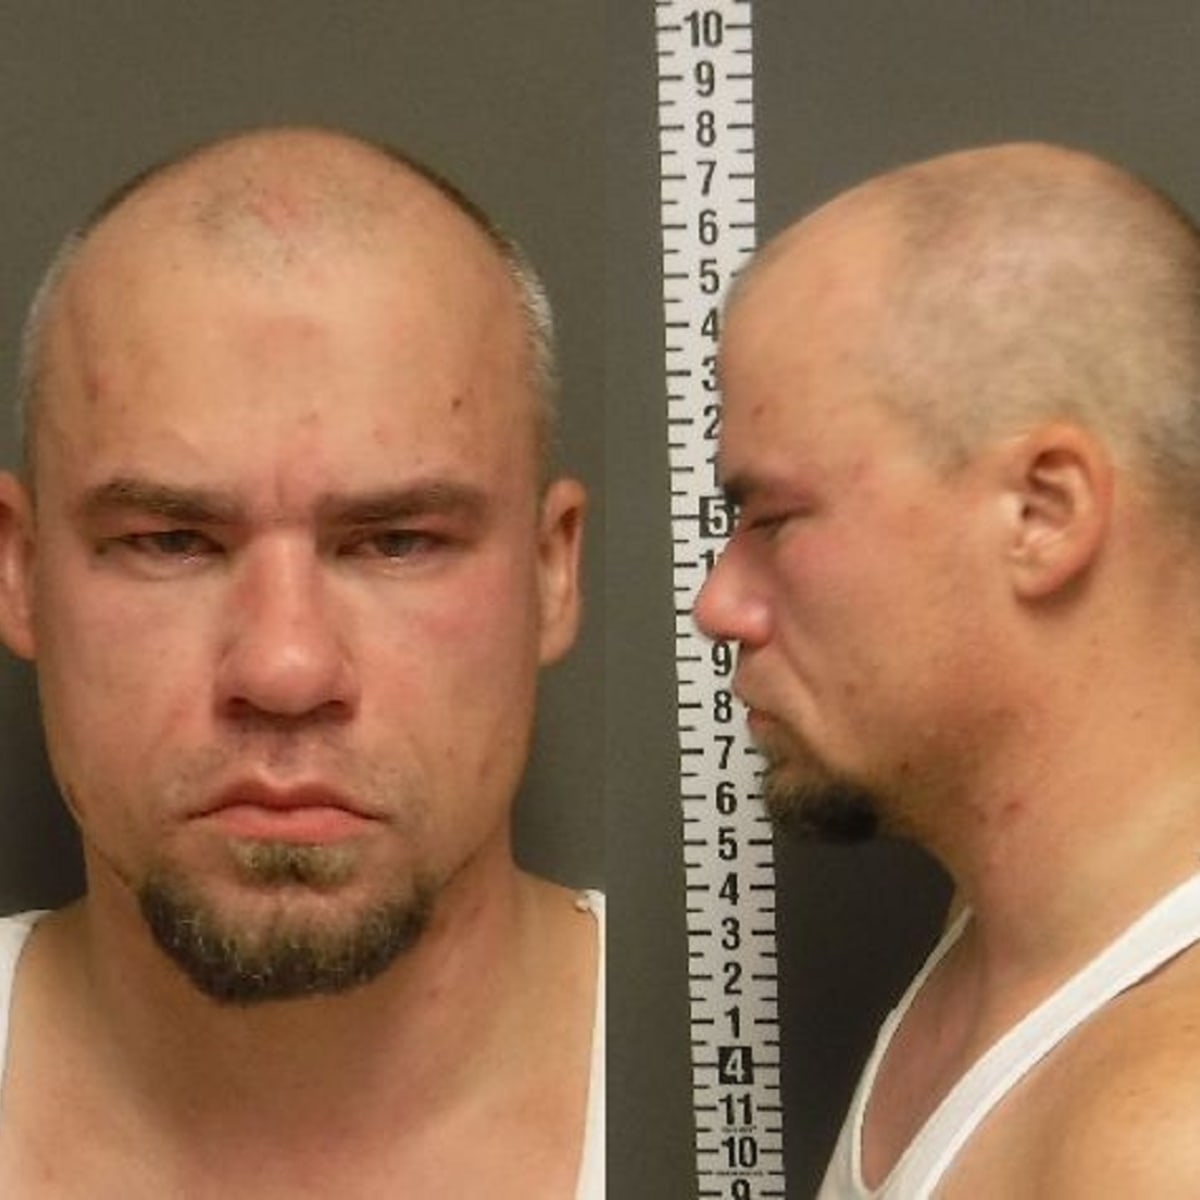 Police Registered sex offender armed with gun wanders into 2 Fargo homes